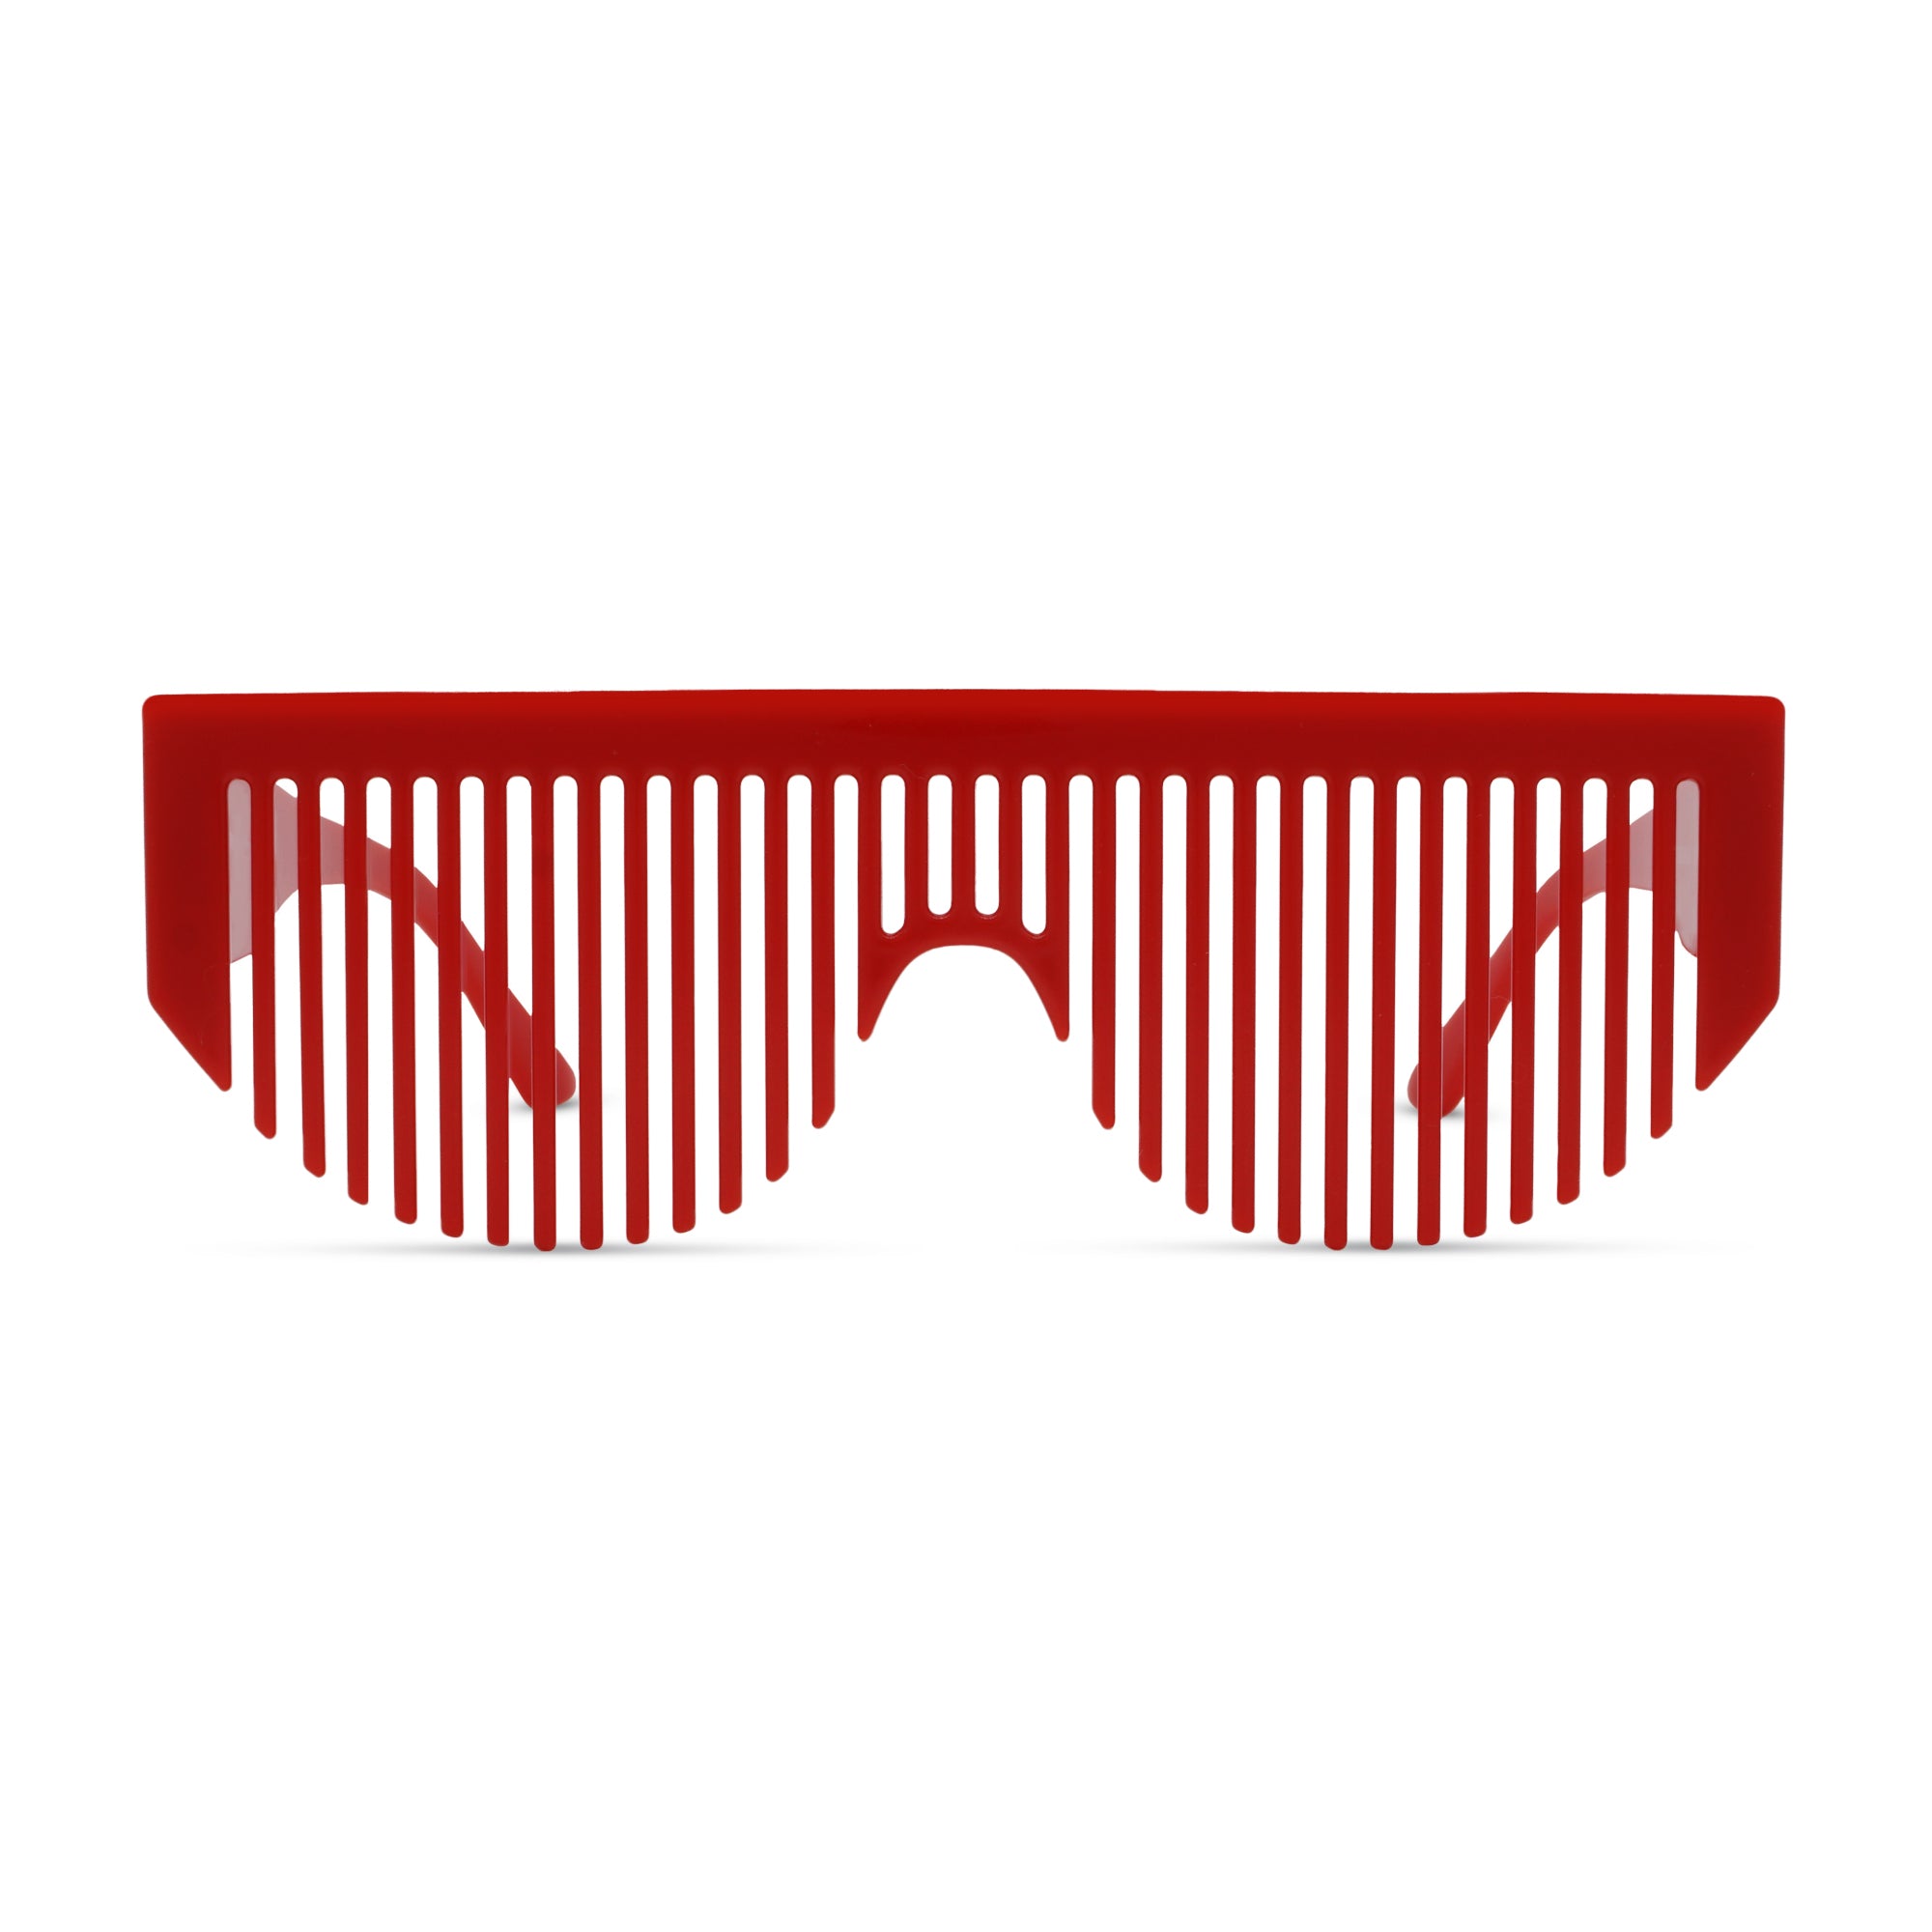 MetroSunnies Limited Edition Comb (Red) / Party Eyewear Without Lens